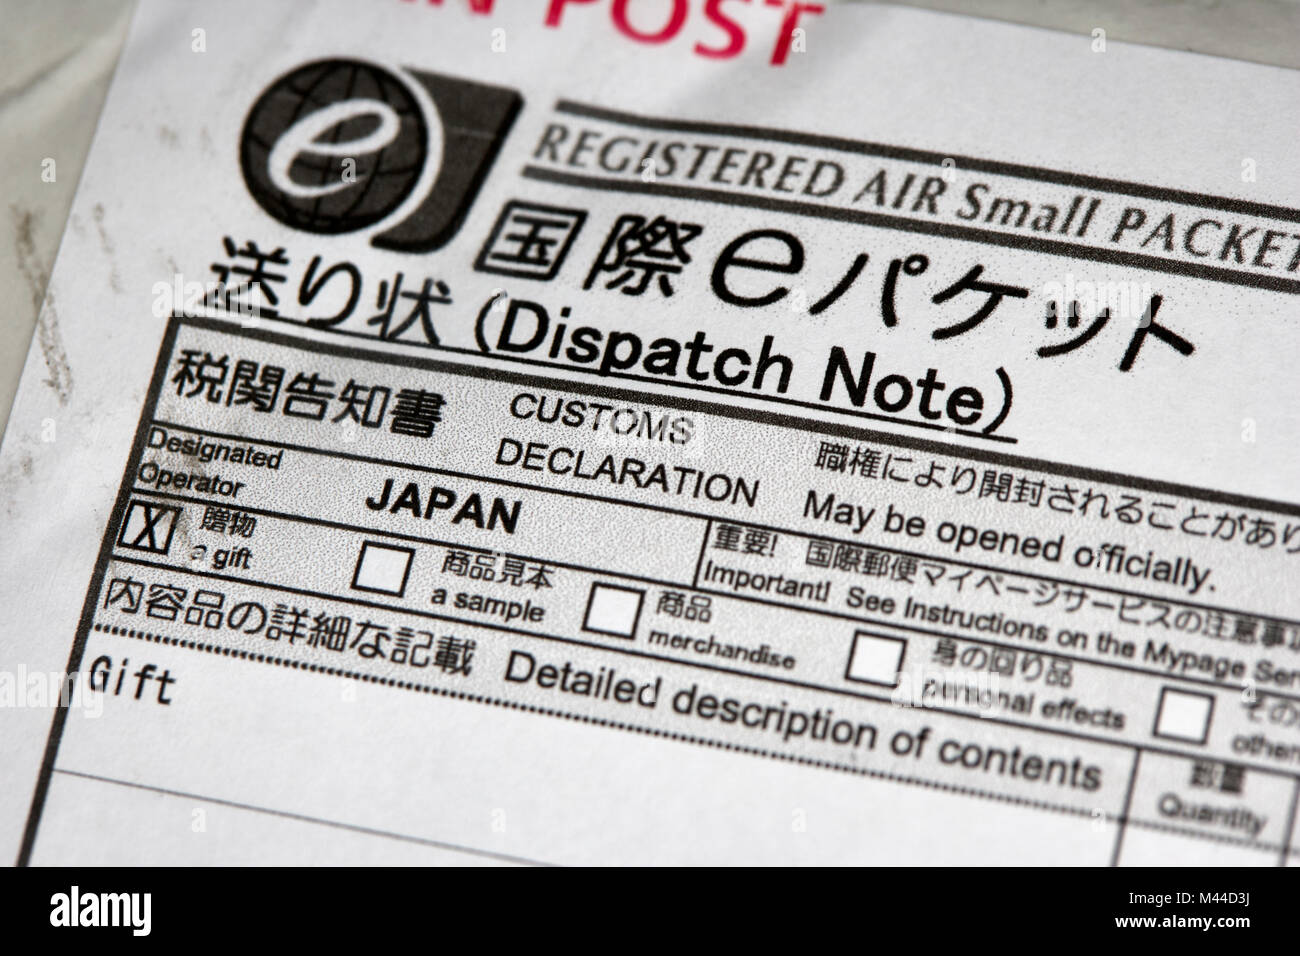 Japan post customs declaration with small packet marked as a gift Stock Photo